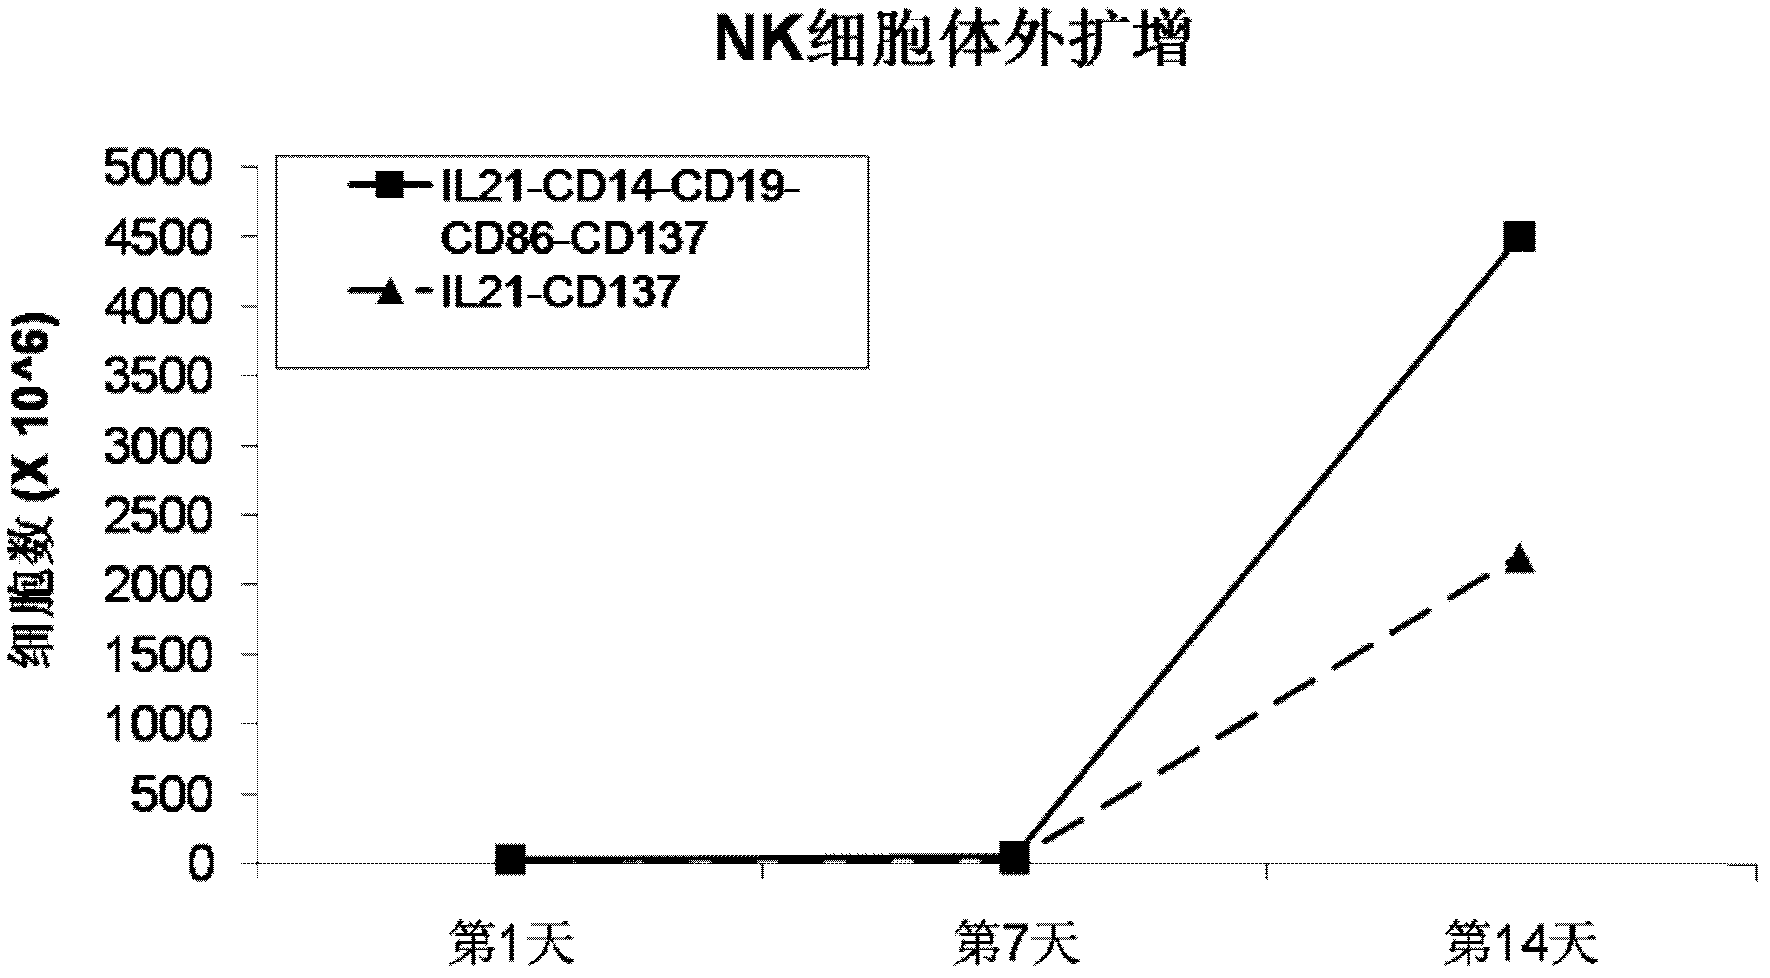 Method for amplifying and activating NK (Natural Killer) cells by K562 cells